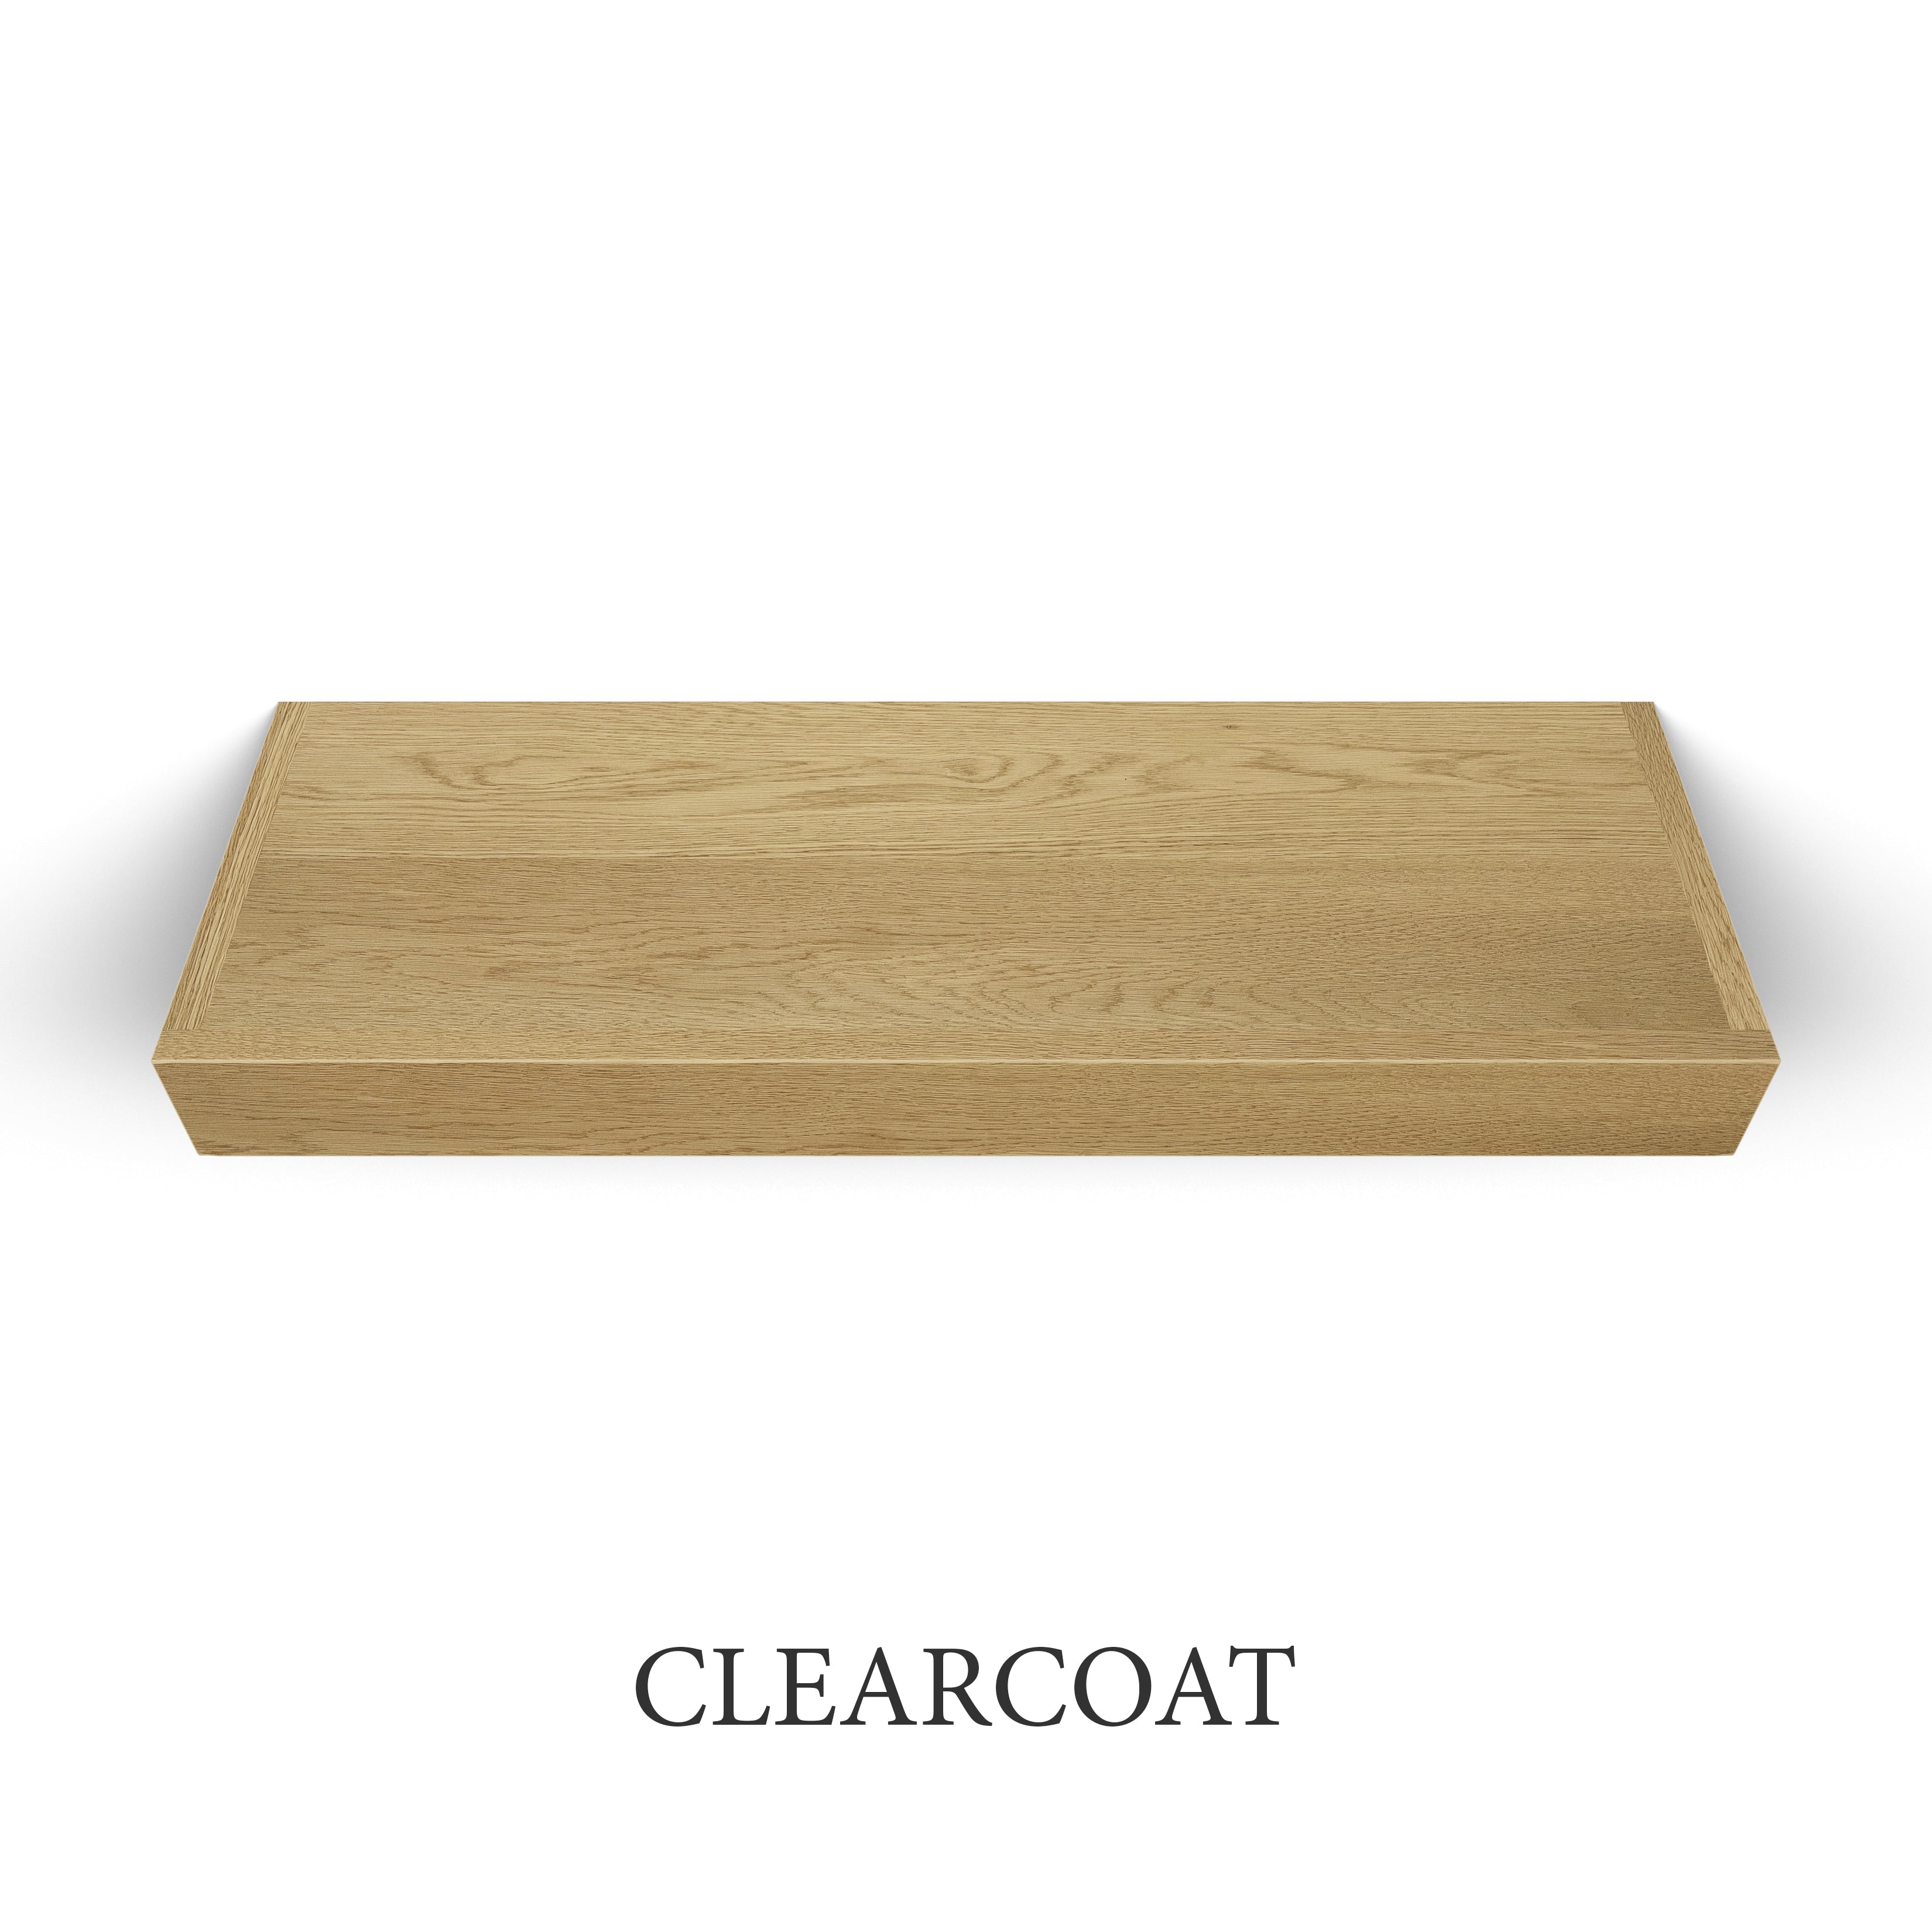 clearcoat White Oak 3 Inch Thick LED Lighted Floating Shelf - Battery